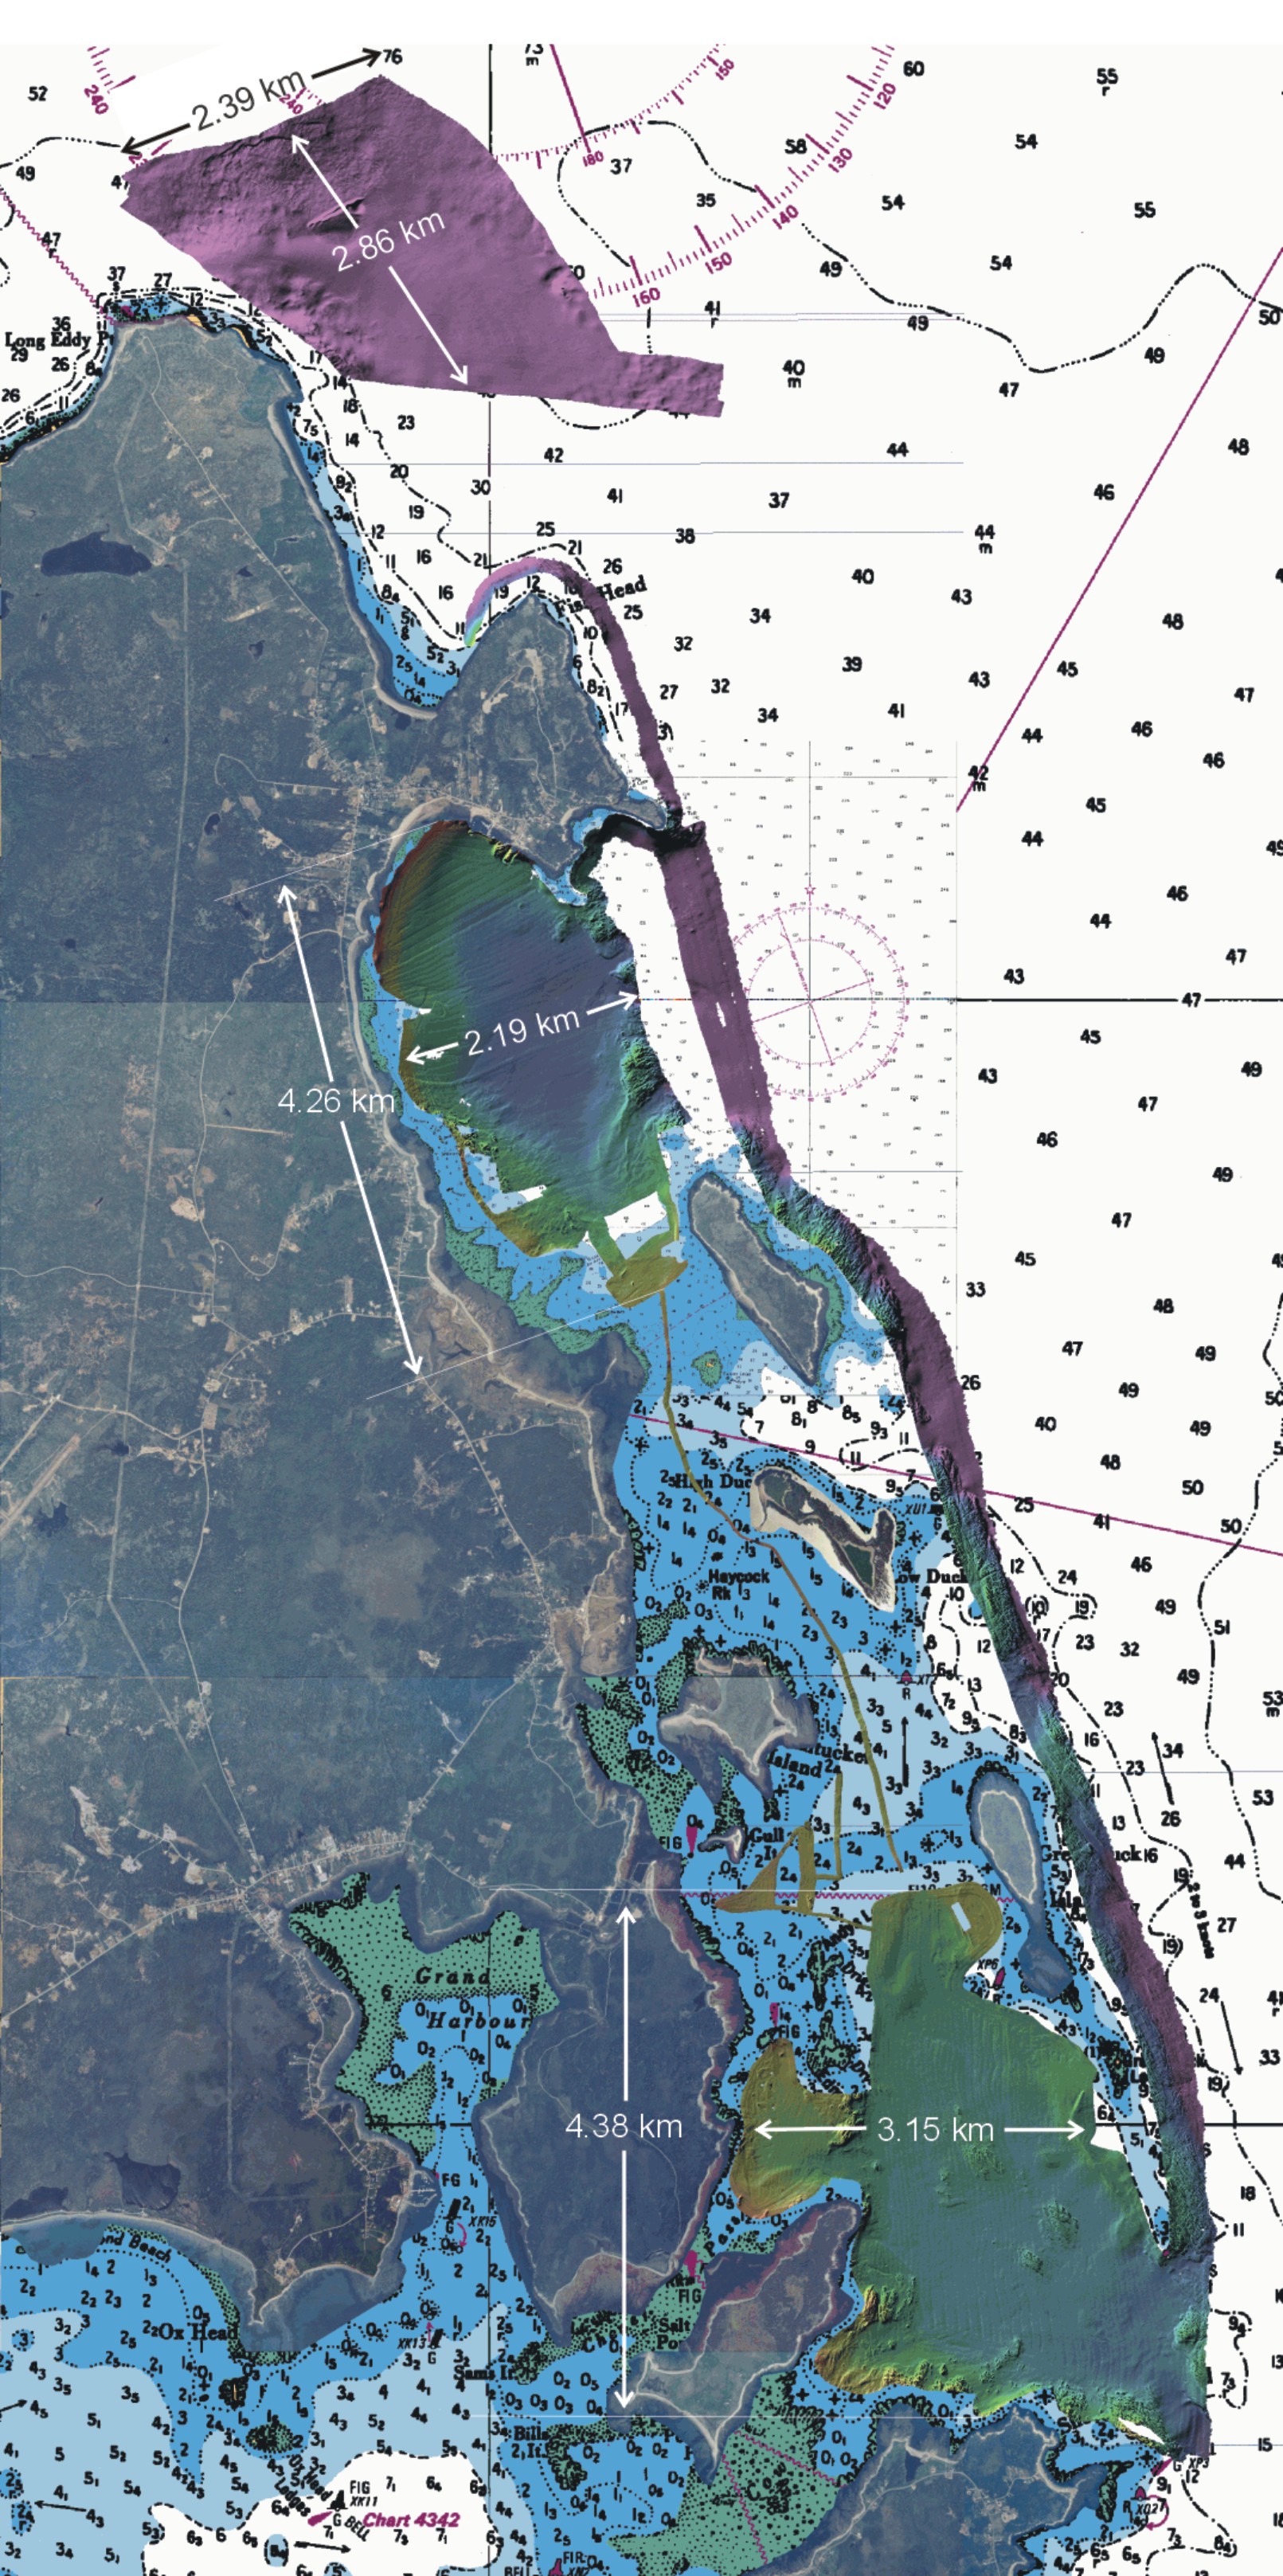 Overview of Survey Areas